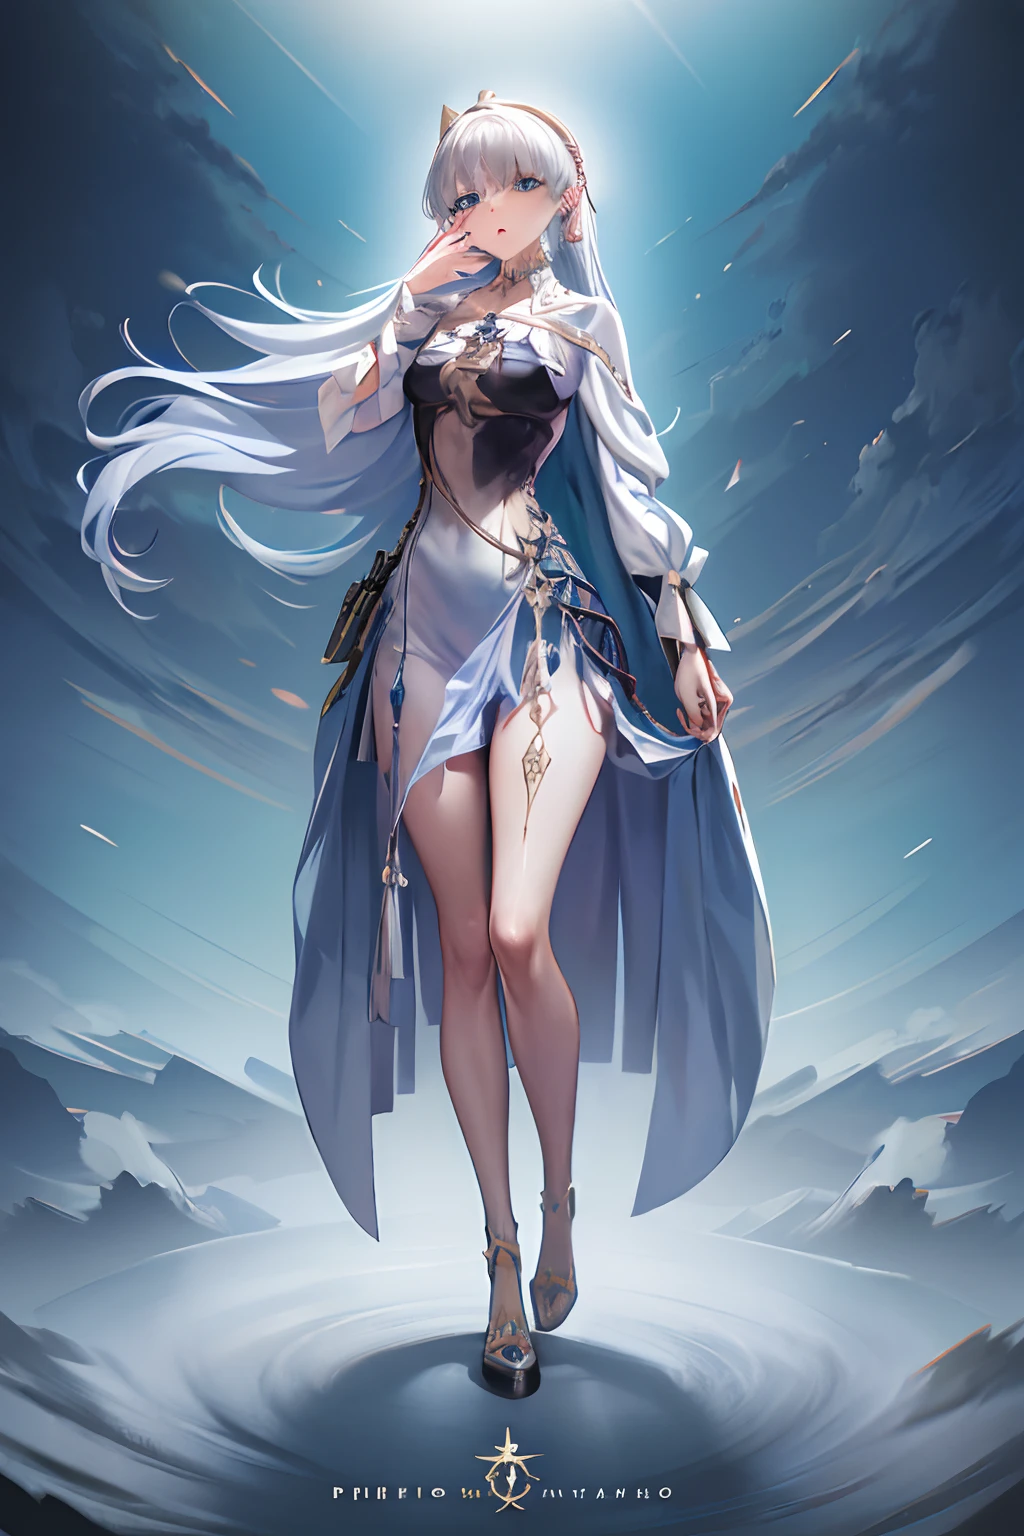 1 masterpiece, extremely detailed, 1 girl, just a girl, inspired by the body and face of Anastasia from the anime FGO, and the hair of Kamisato Ayaka, perfect combination of characteristics, blue eyes, long brown hair, medium breasts, foot, dynamic pose, short revealing dress, shoe with heels, tight thigh stockings, wide thighs, full body, perfect anatomy, beautiful, girl of extreme beauty